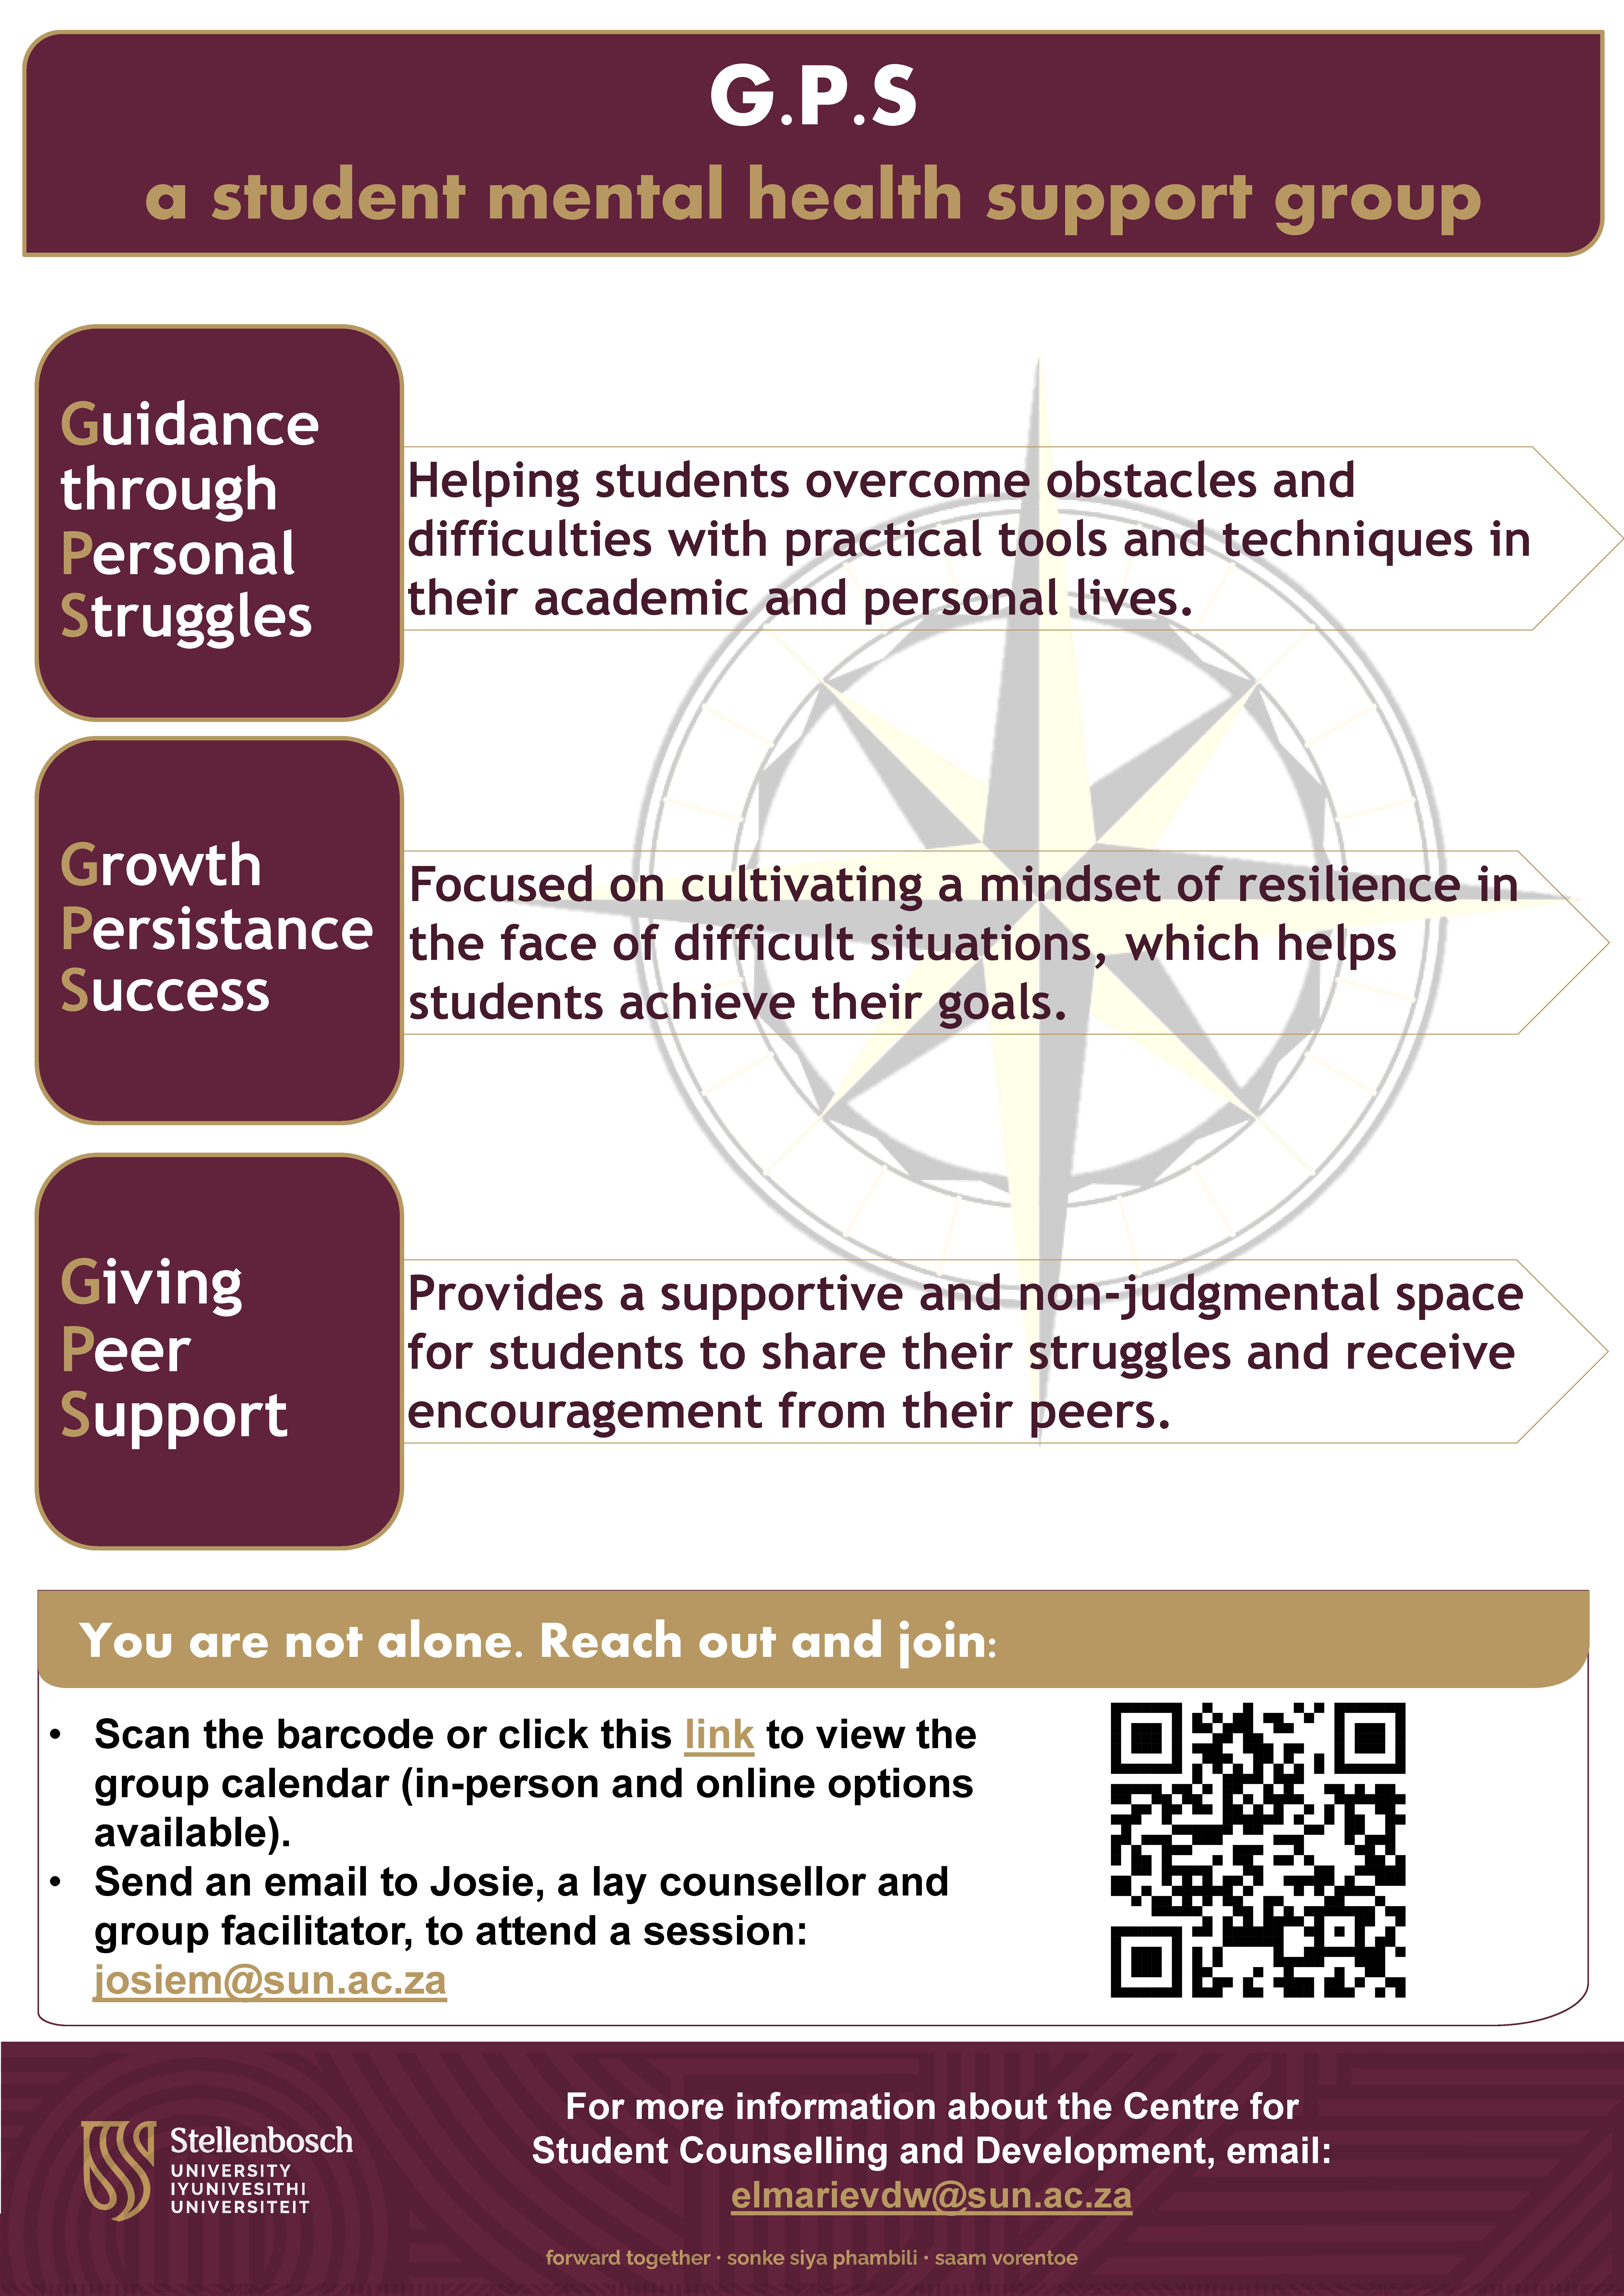 GPS Student Mental Health Support Group Poster.jpg